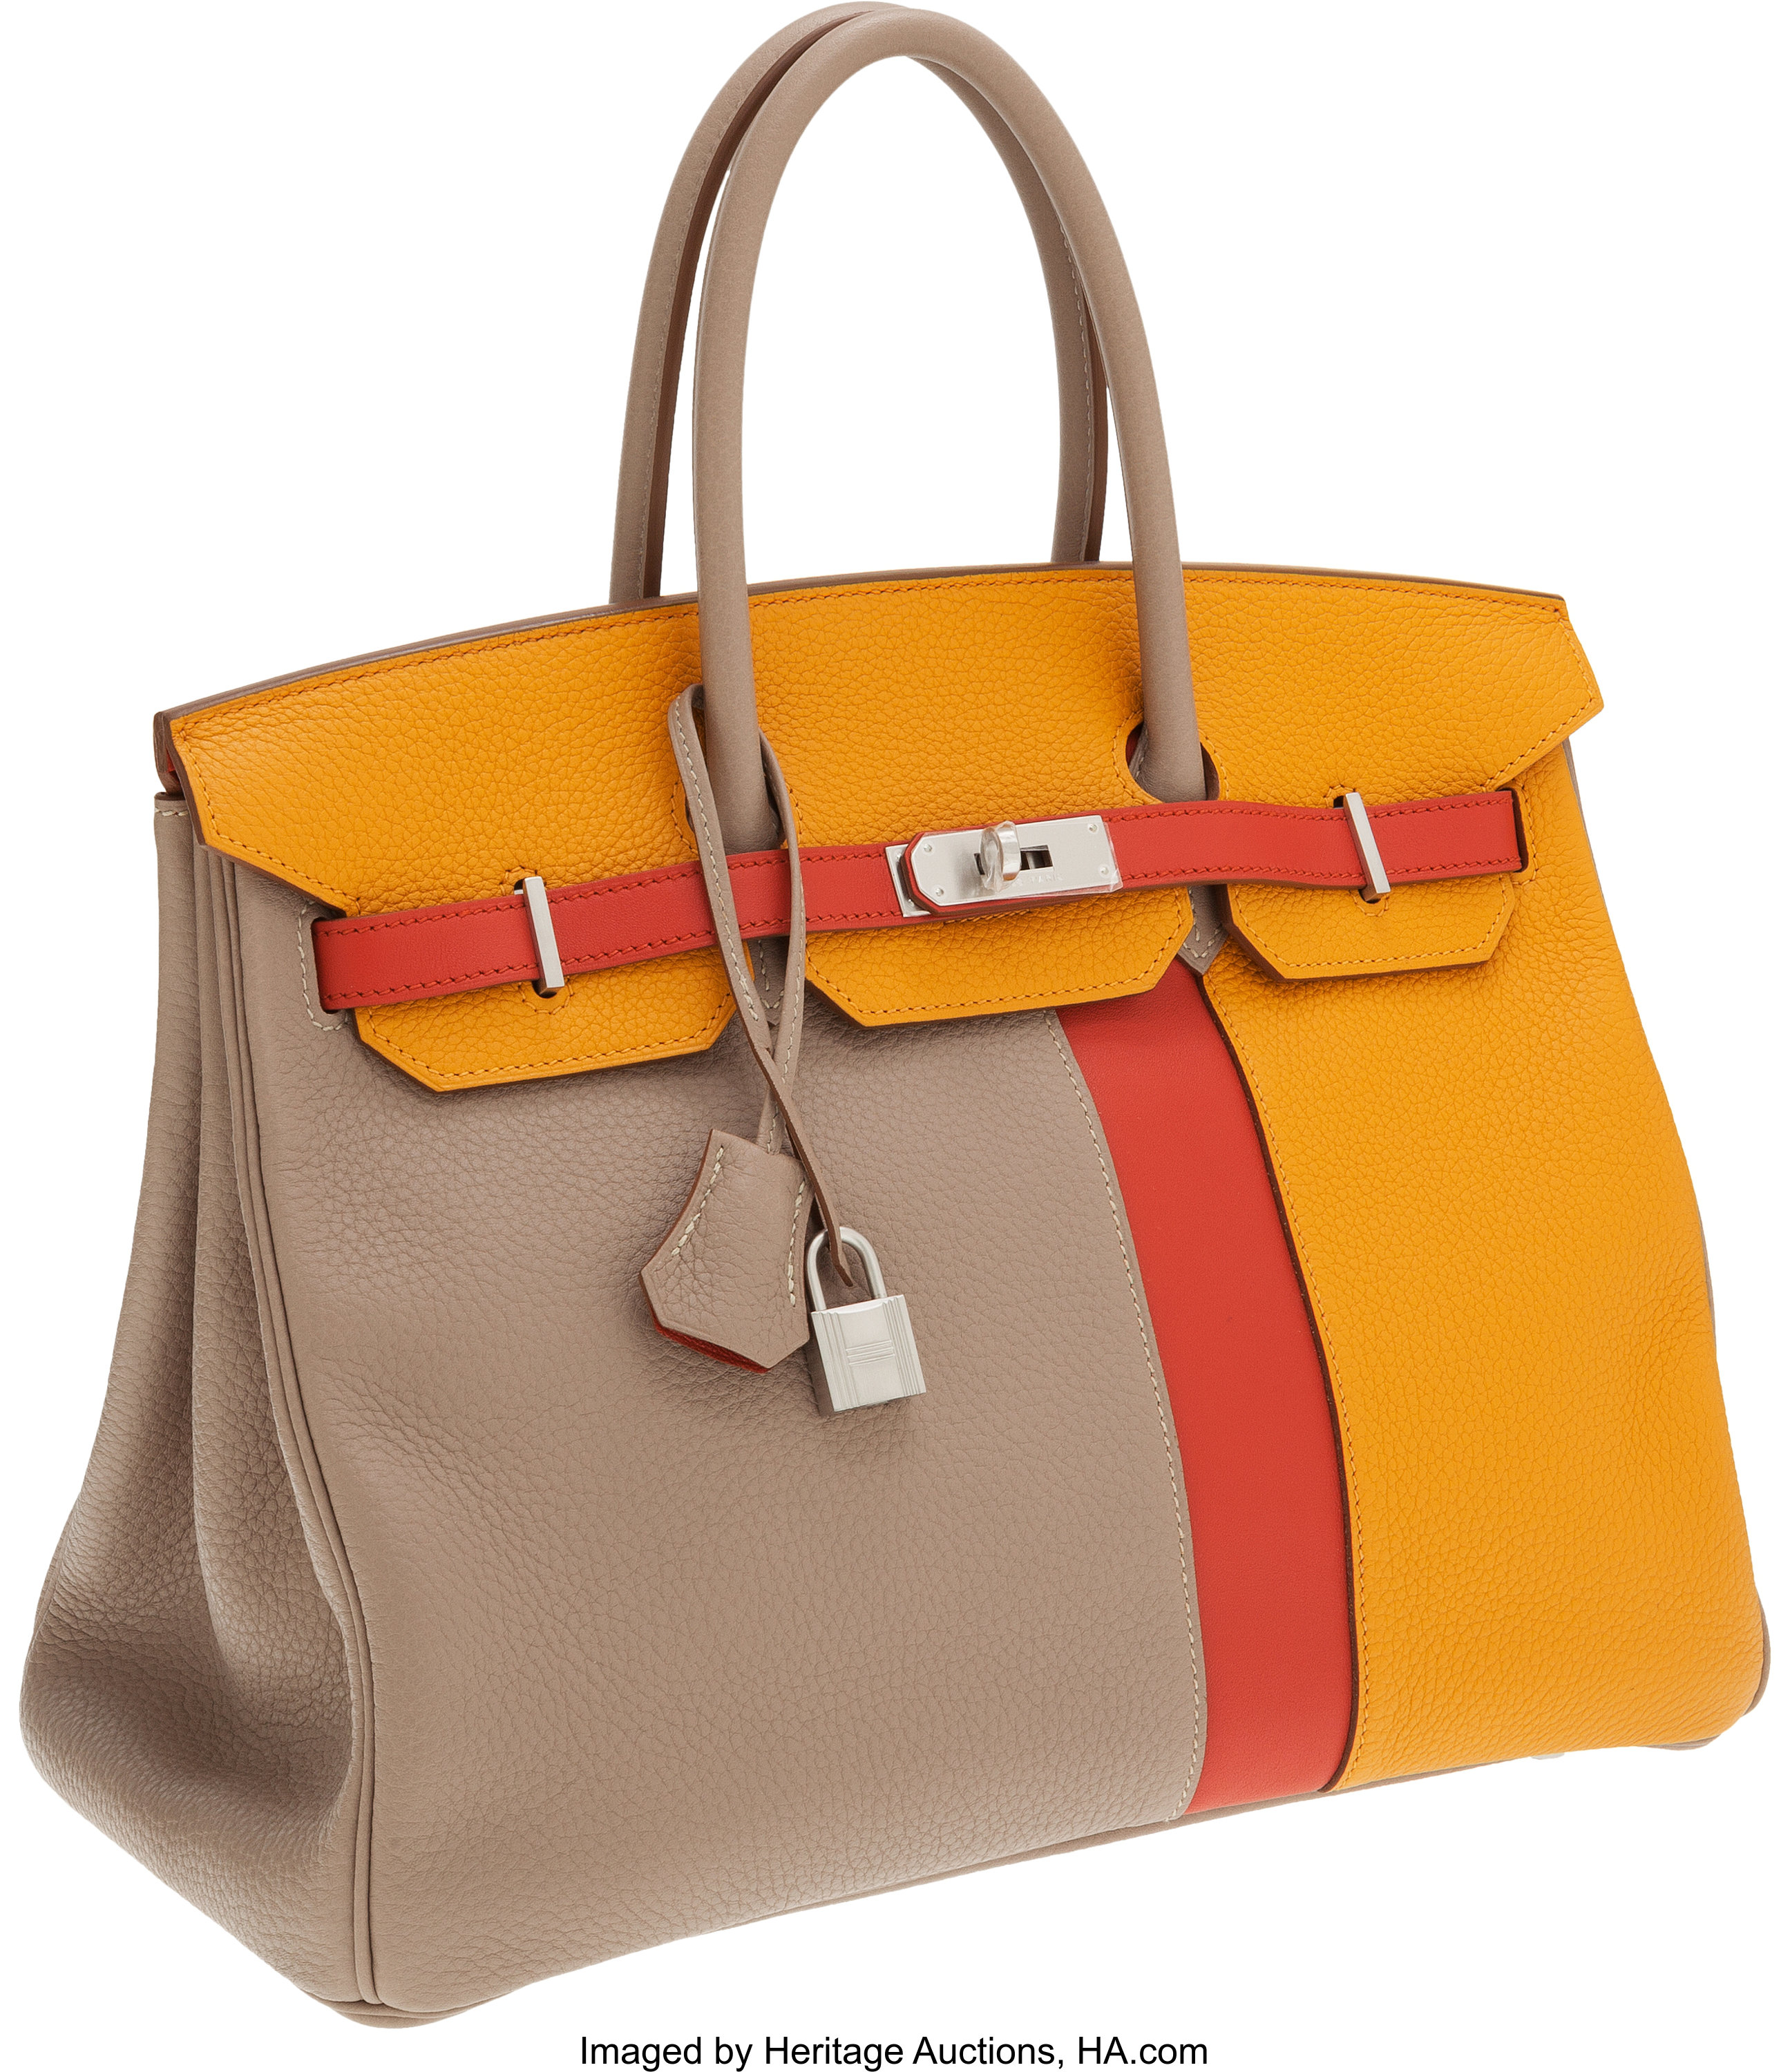 Sold at Auction: Hermes Limited Edition Tri-Color Birkin 35 W/Box